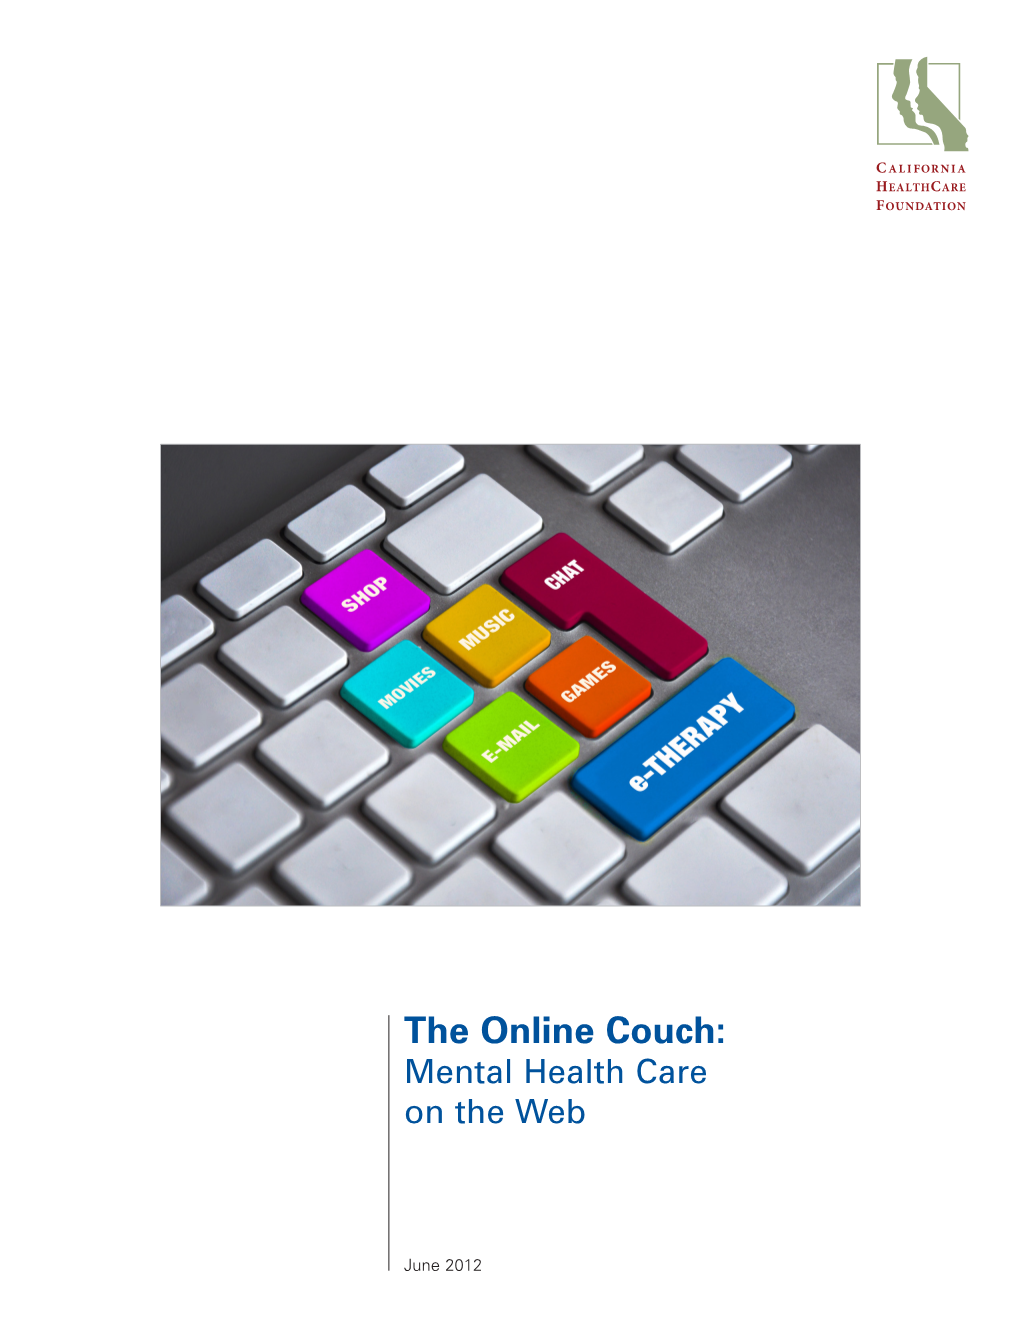 Mental Health Care on the Web